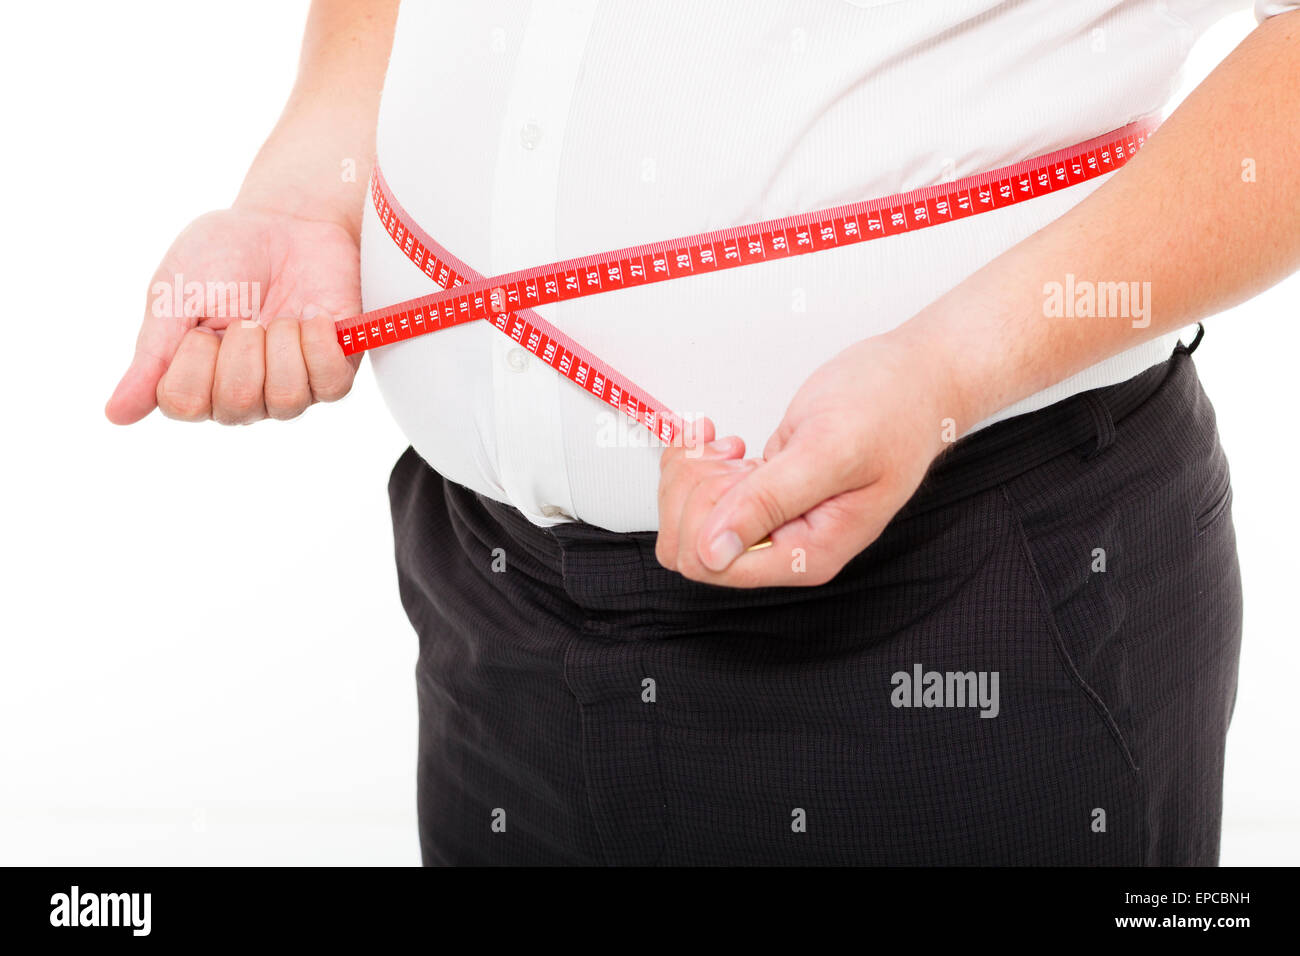 Fat man holding a measurement tape Stock Photo